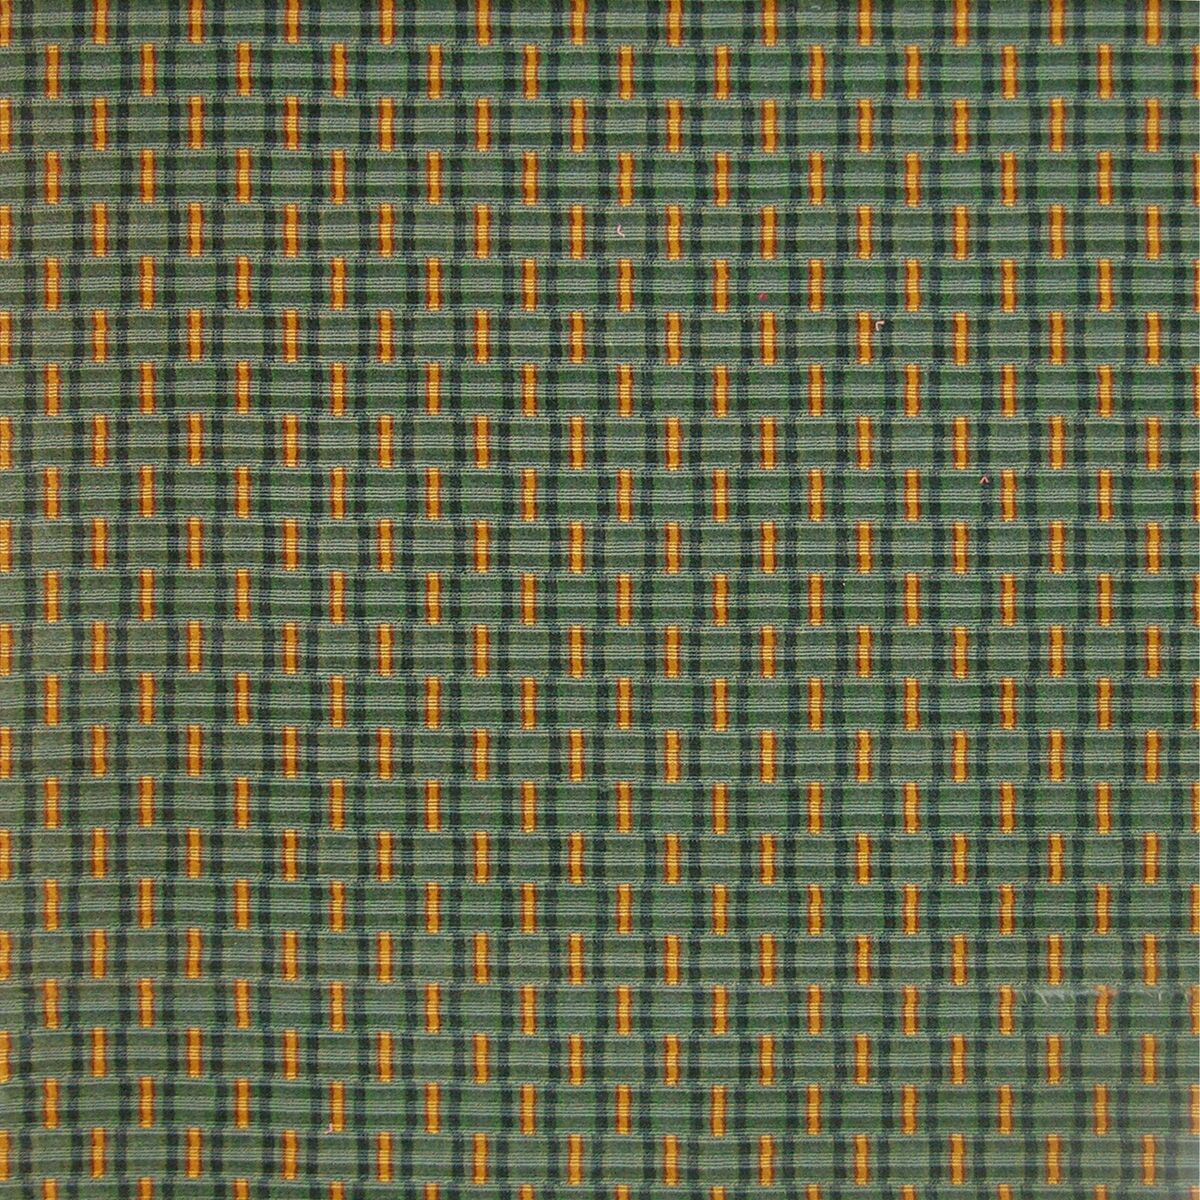 Rambouillet fabric in turquoise gold color - pattern number LE 00021566 - by Scalamandre in the Old World Weavers collection